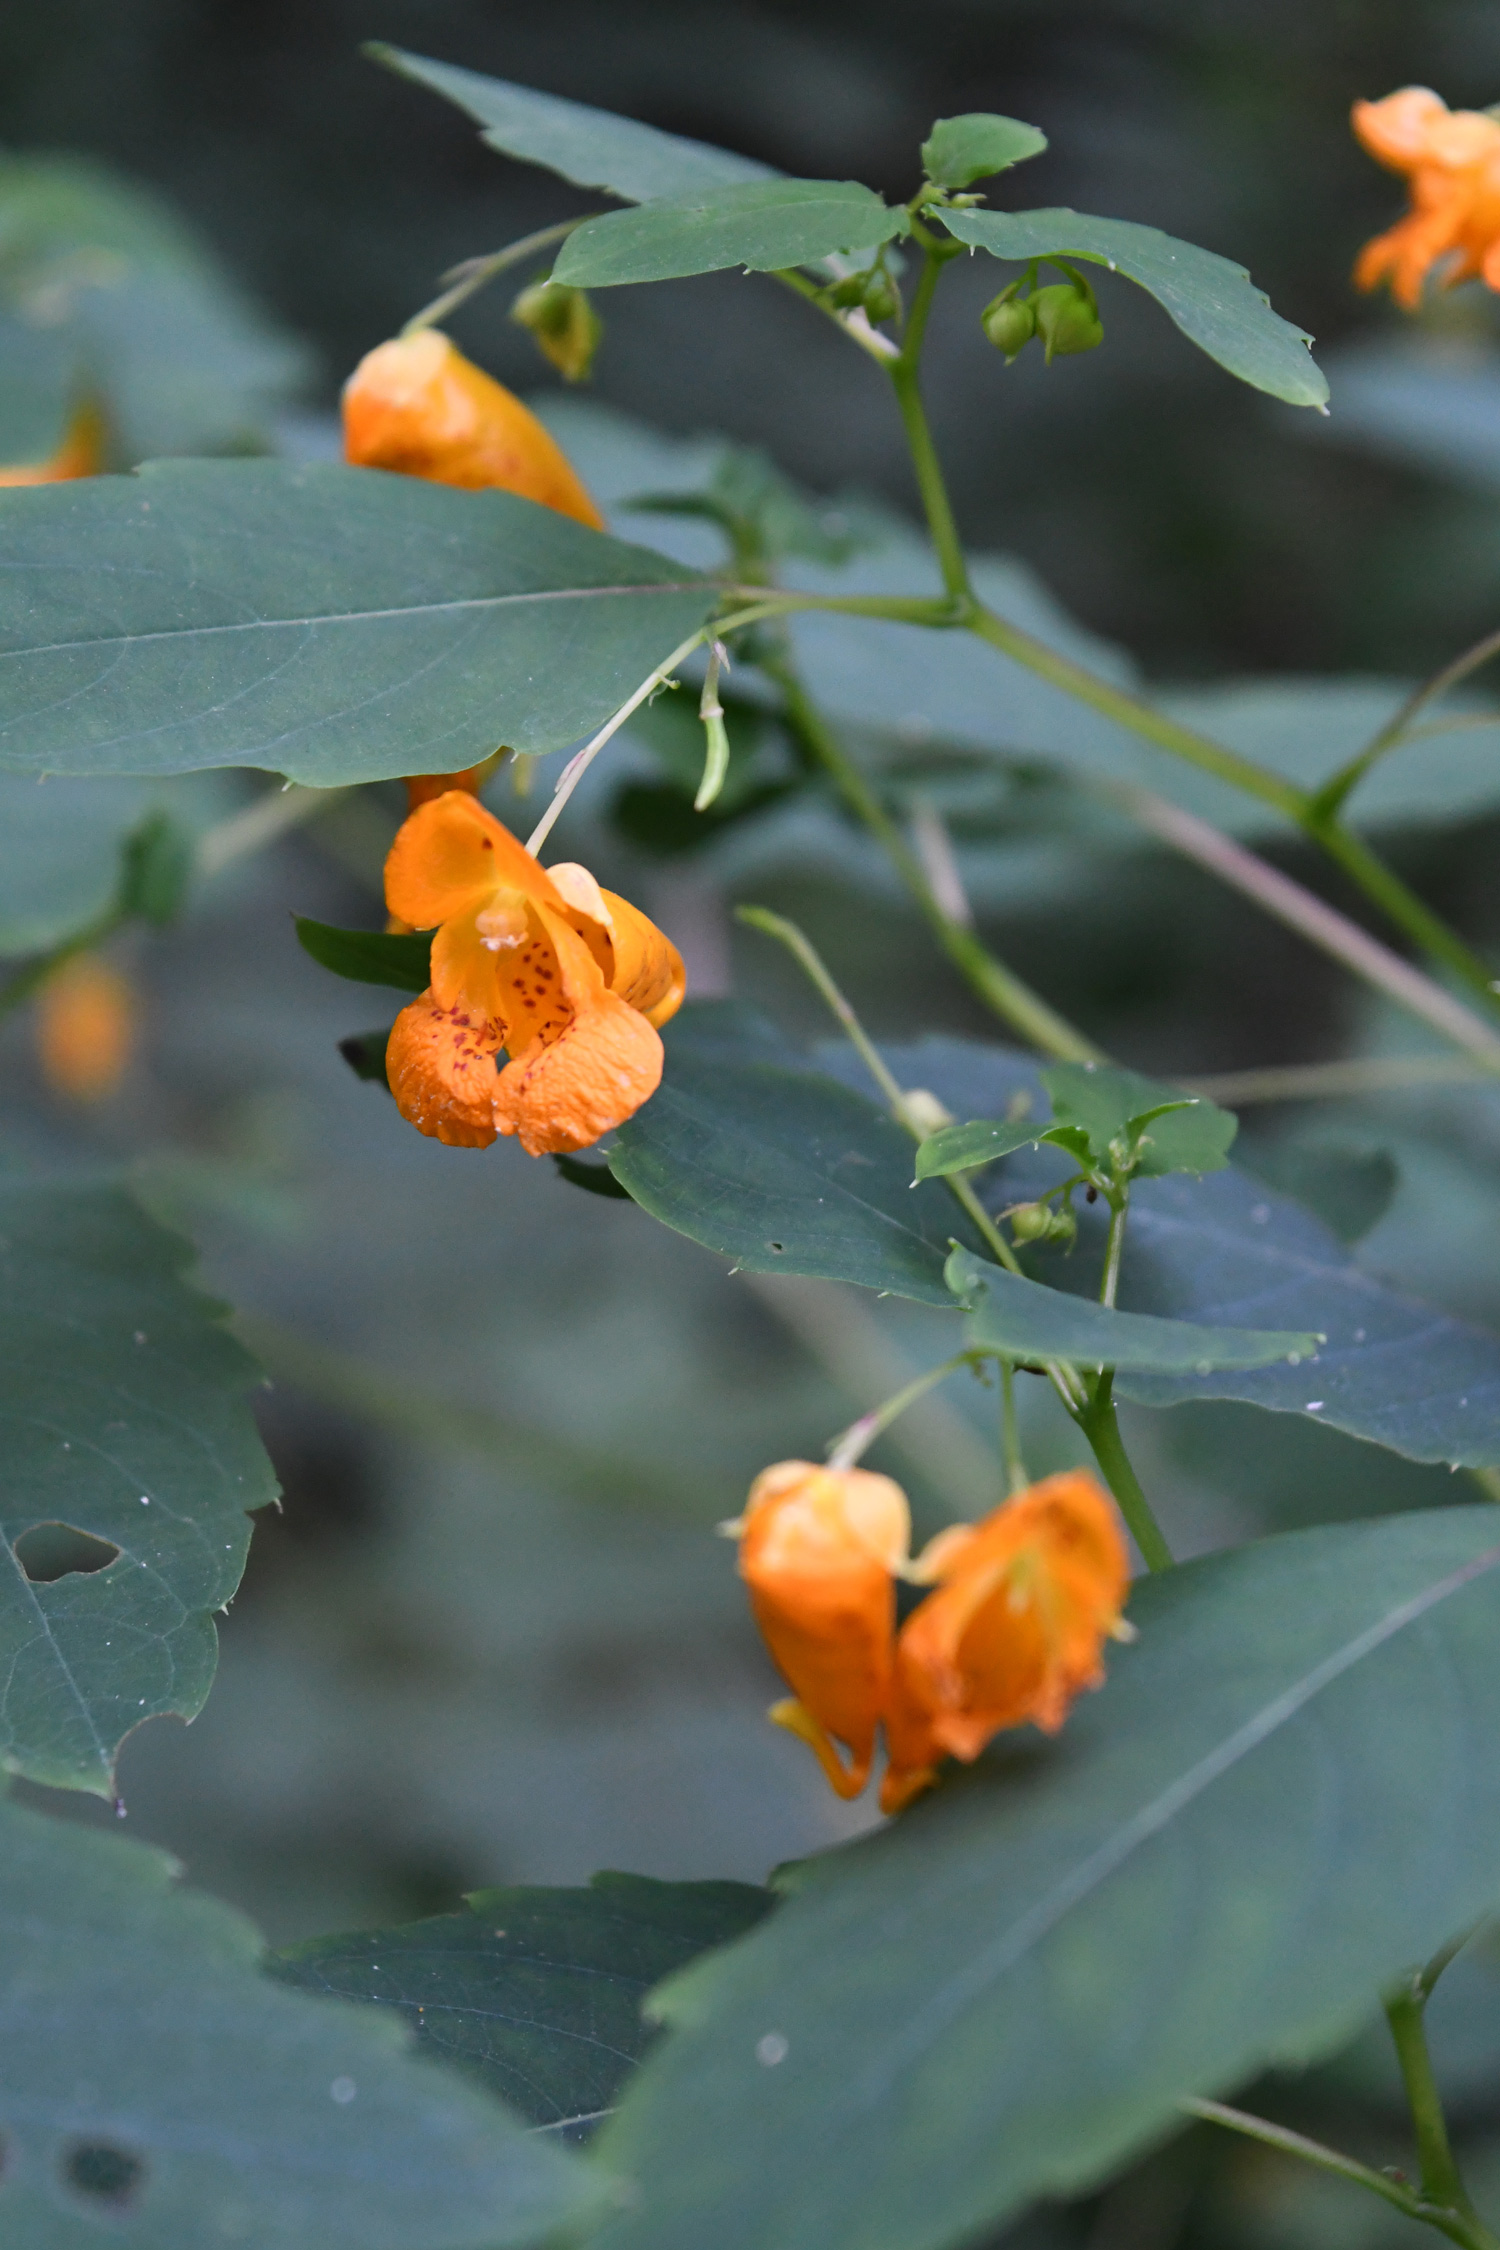 Orange jewelweed / spotted touch-me-not, Prospect Park